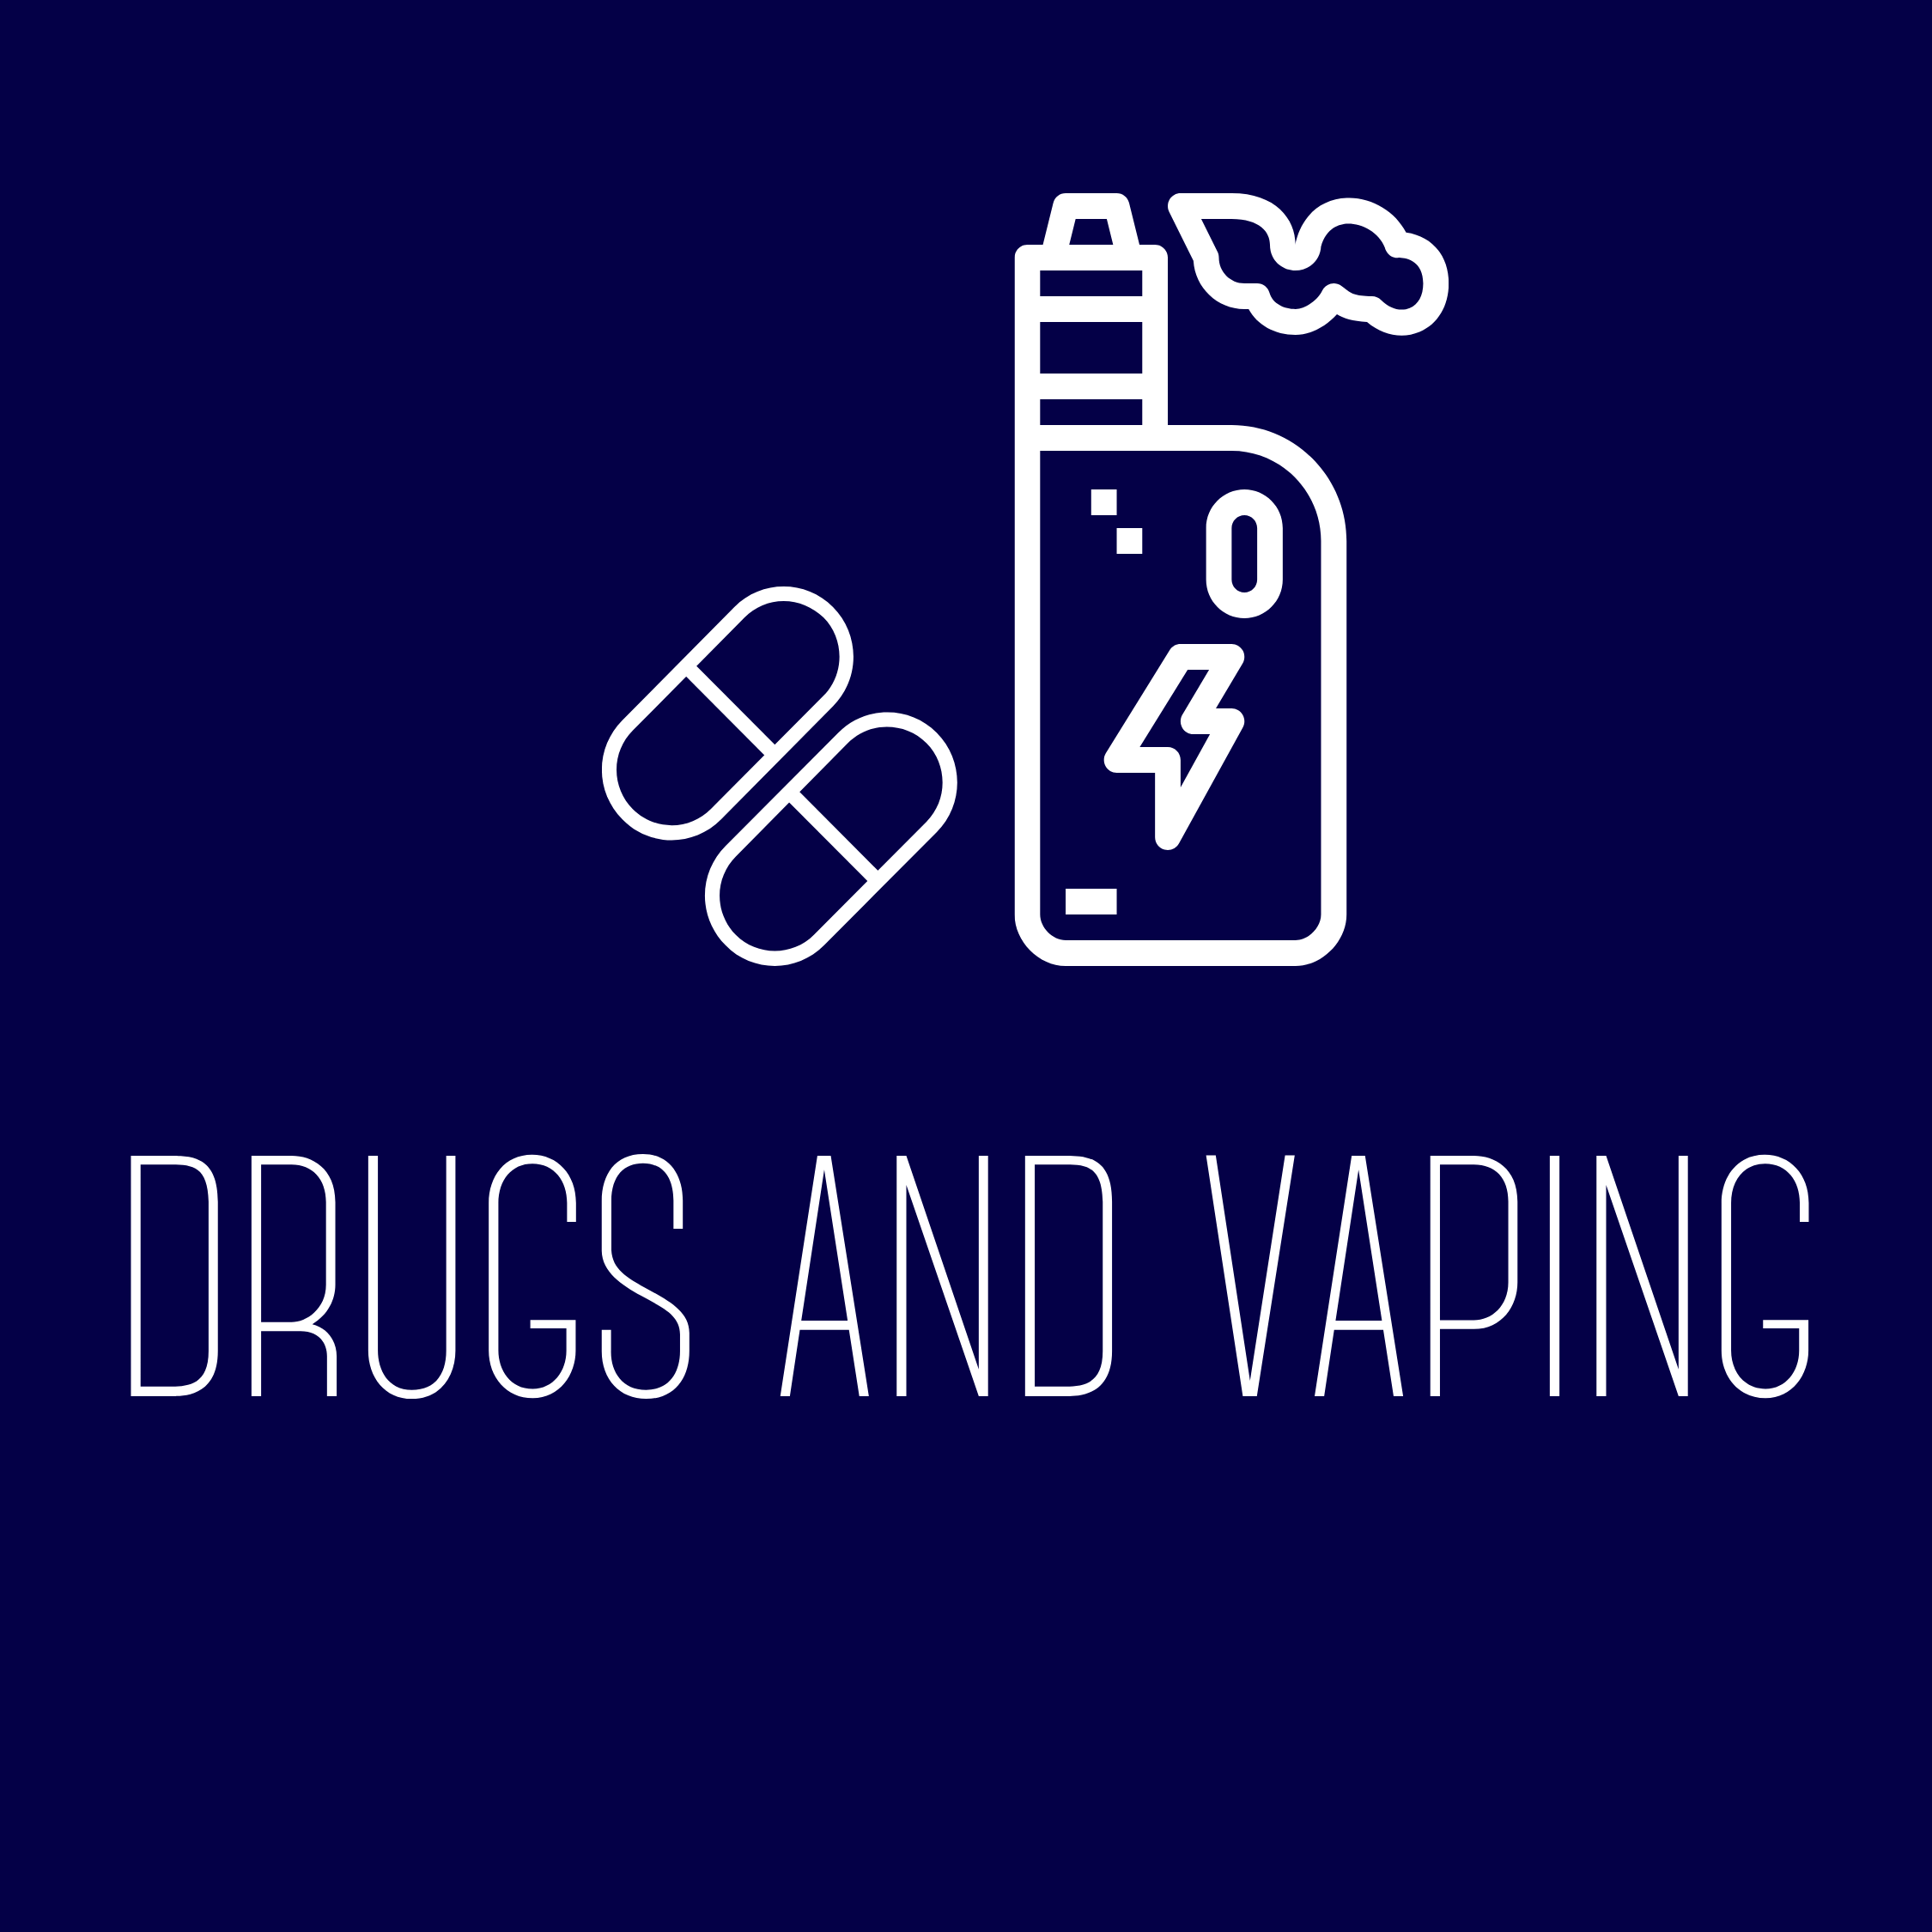 Drugs and Vaping